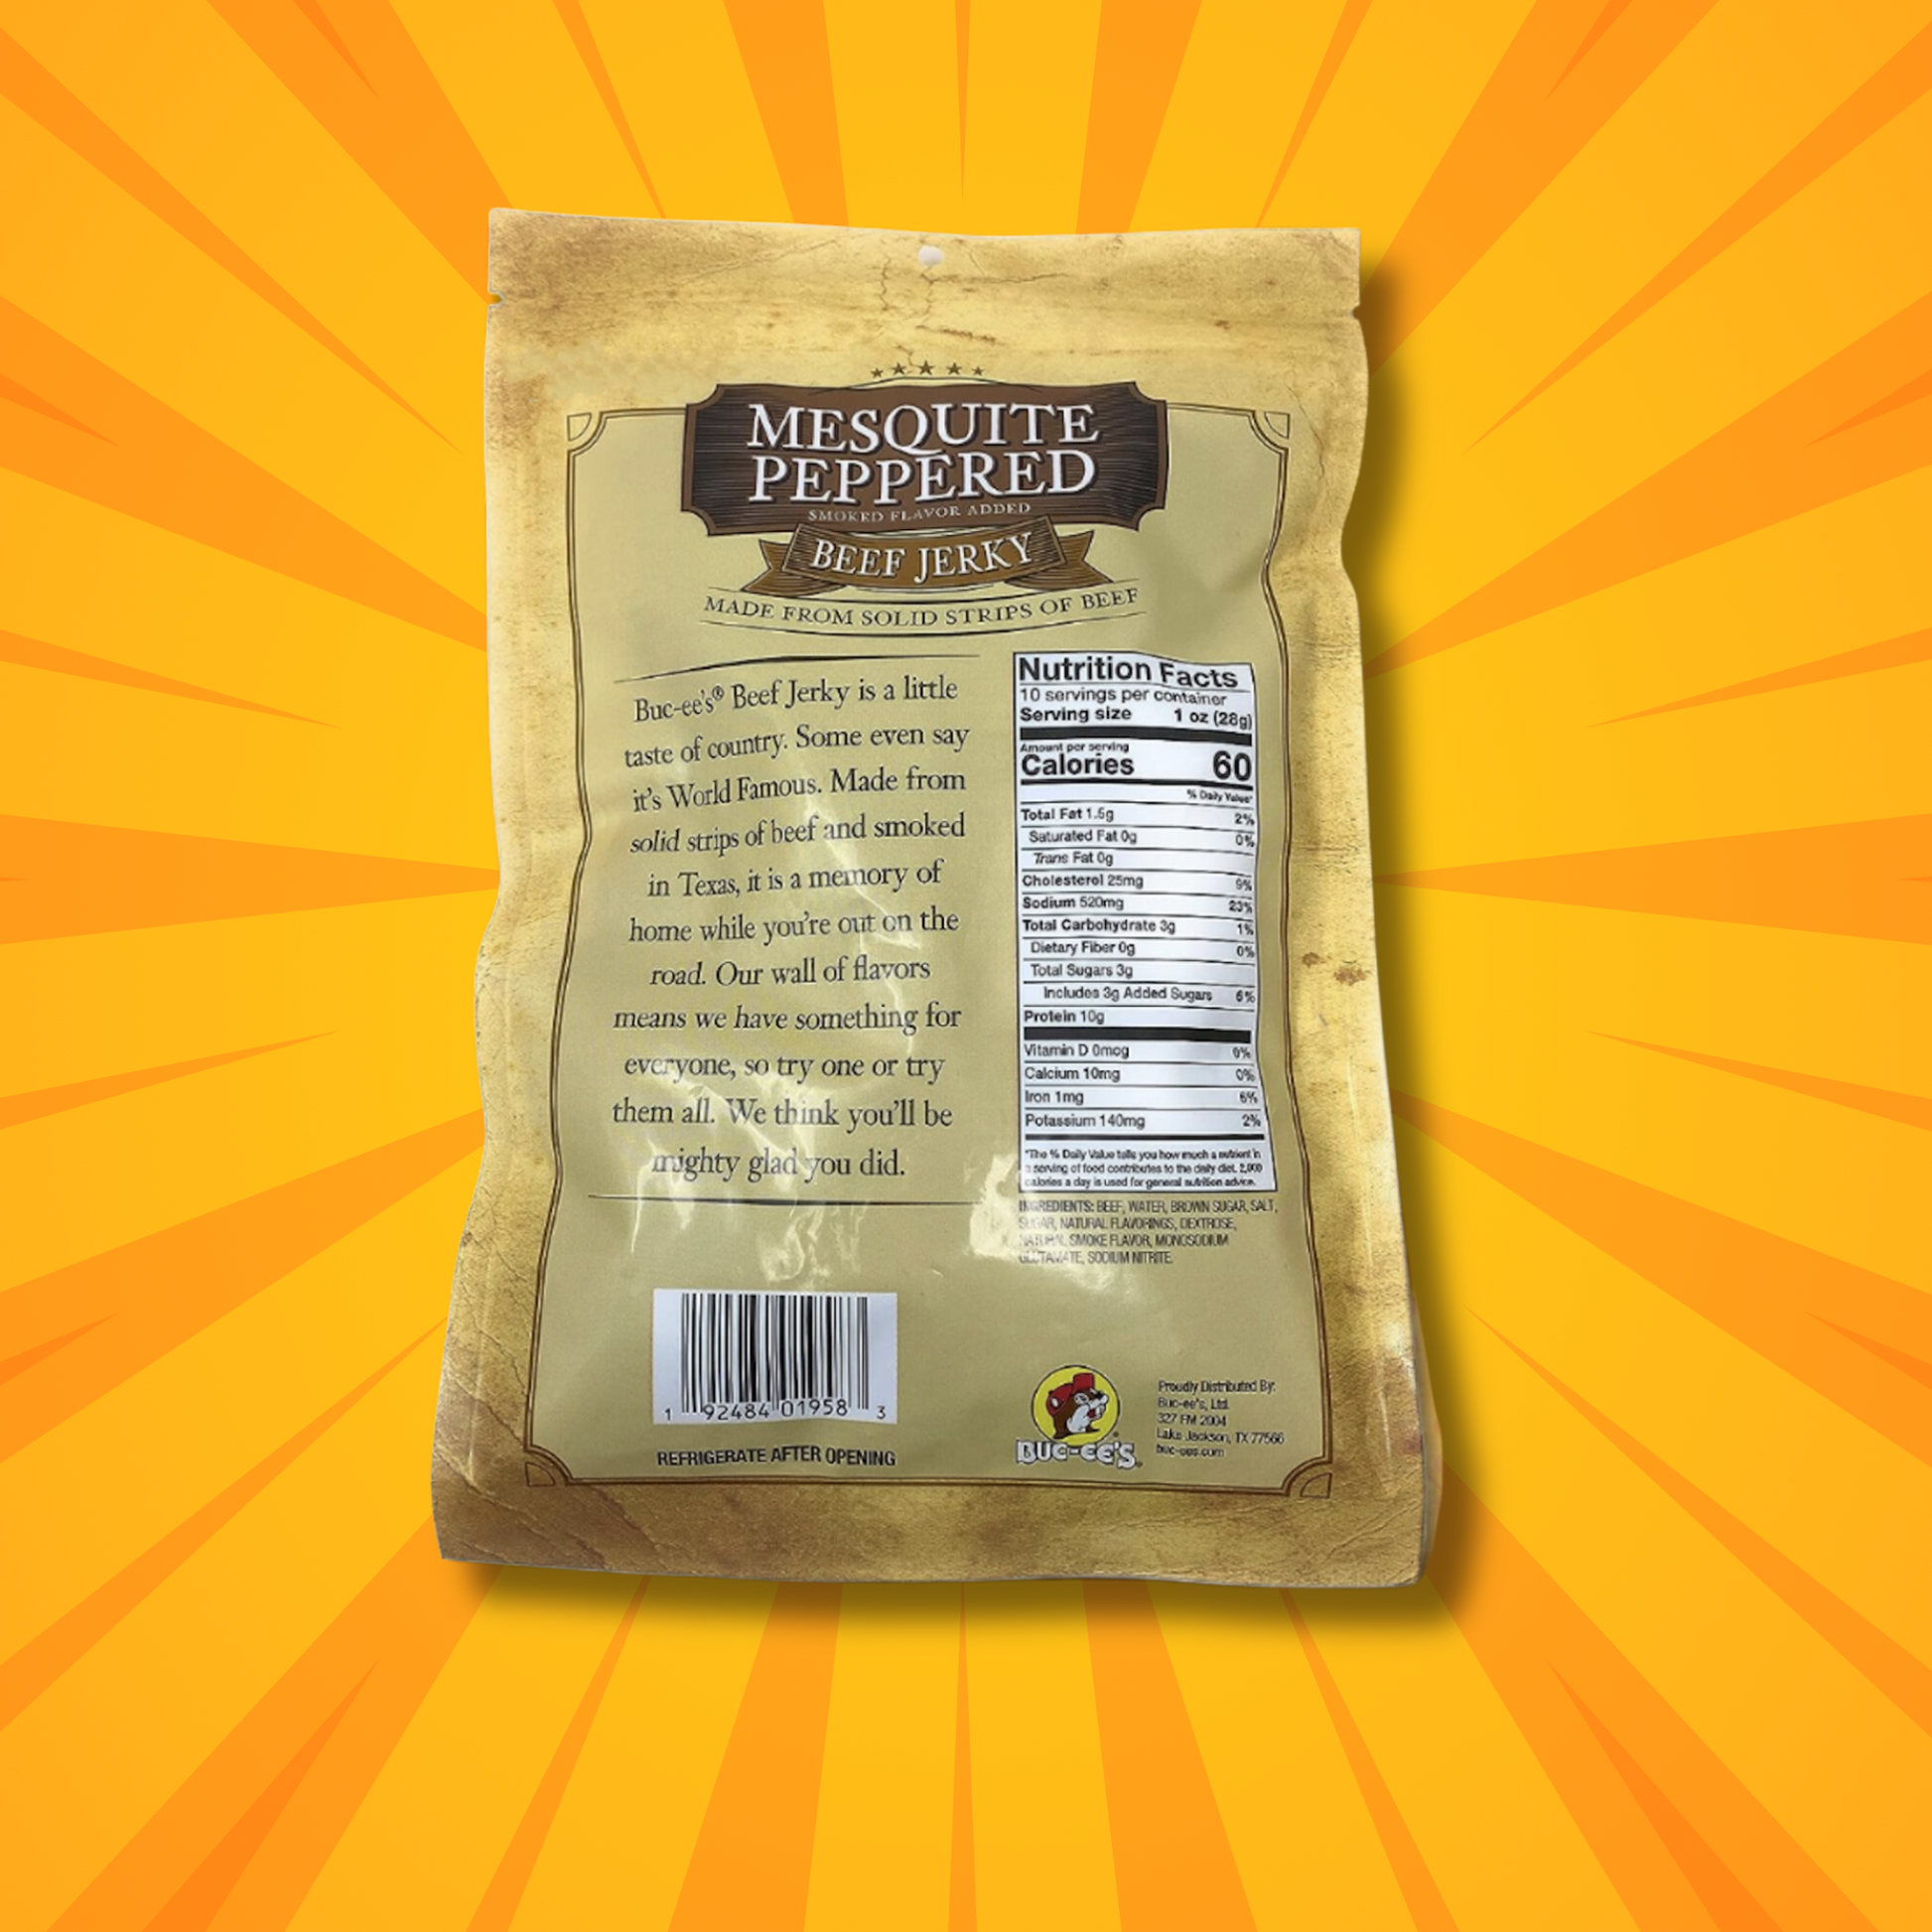 Buc-ee's Beef Jerky - Mesquite Peppered Flavor (Back of Bag with Nutrition Facts)